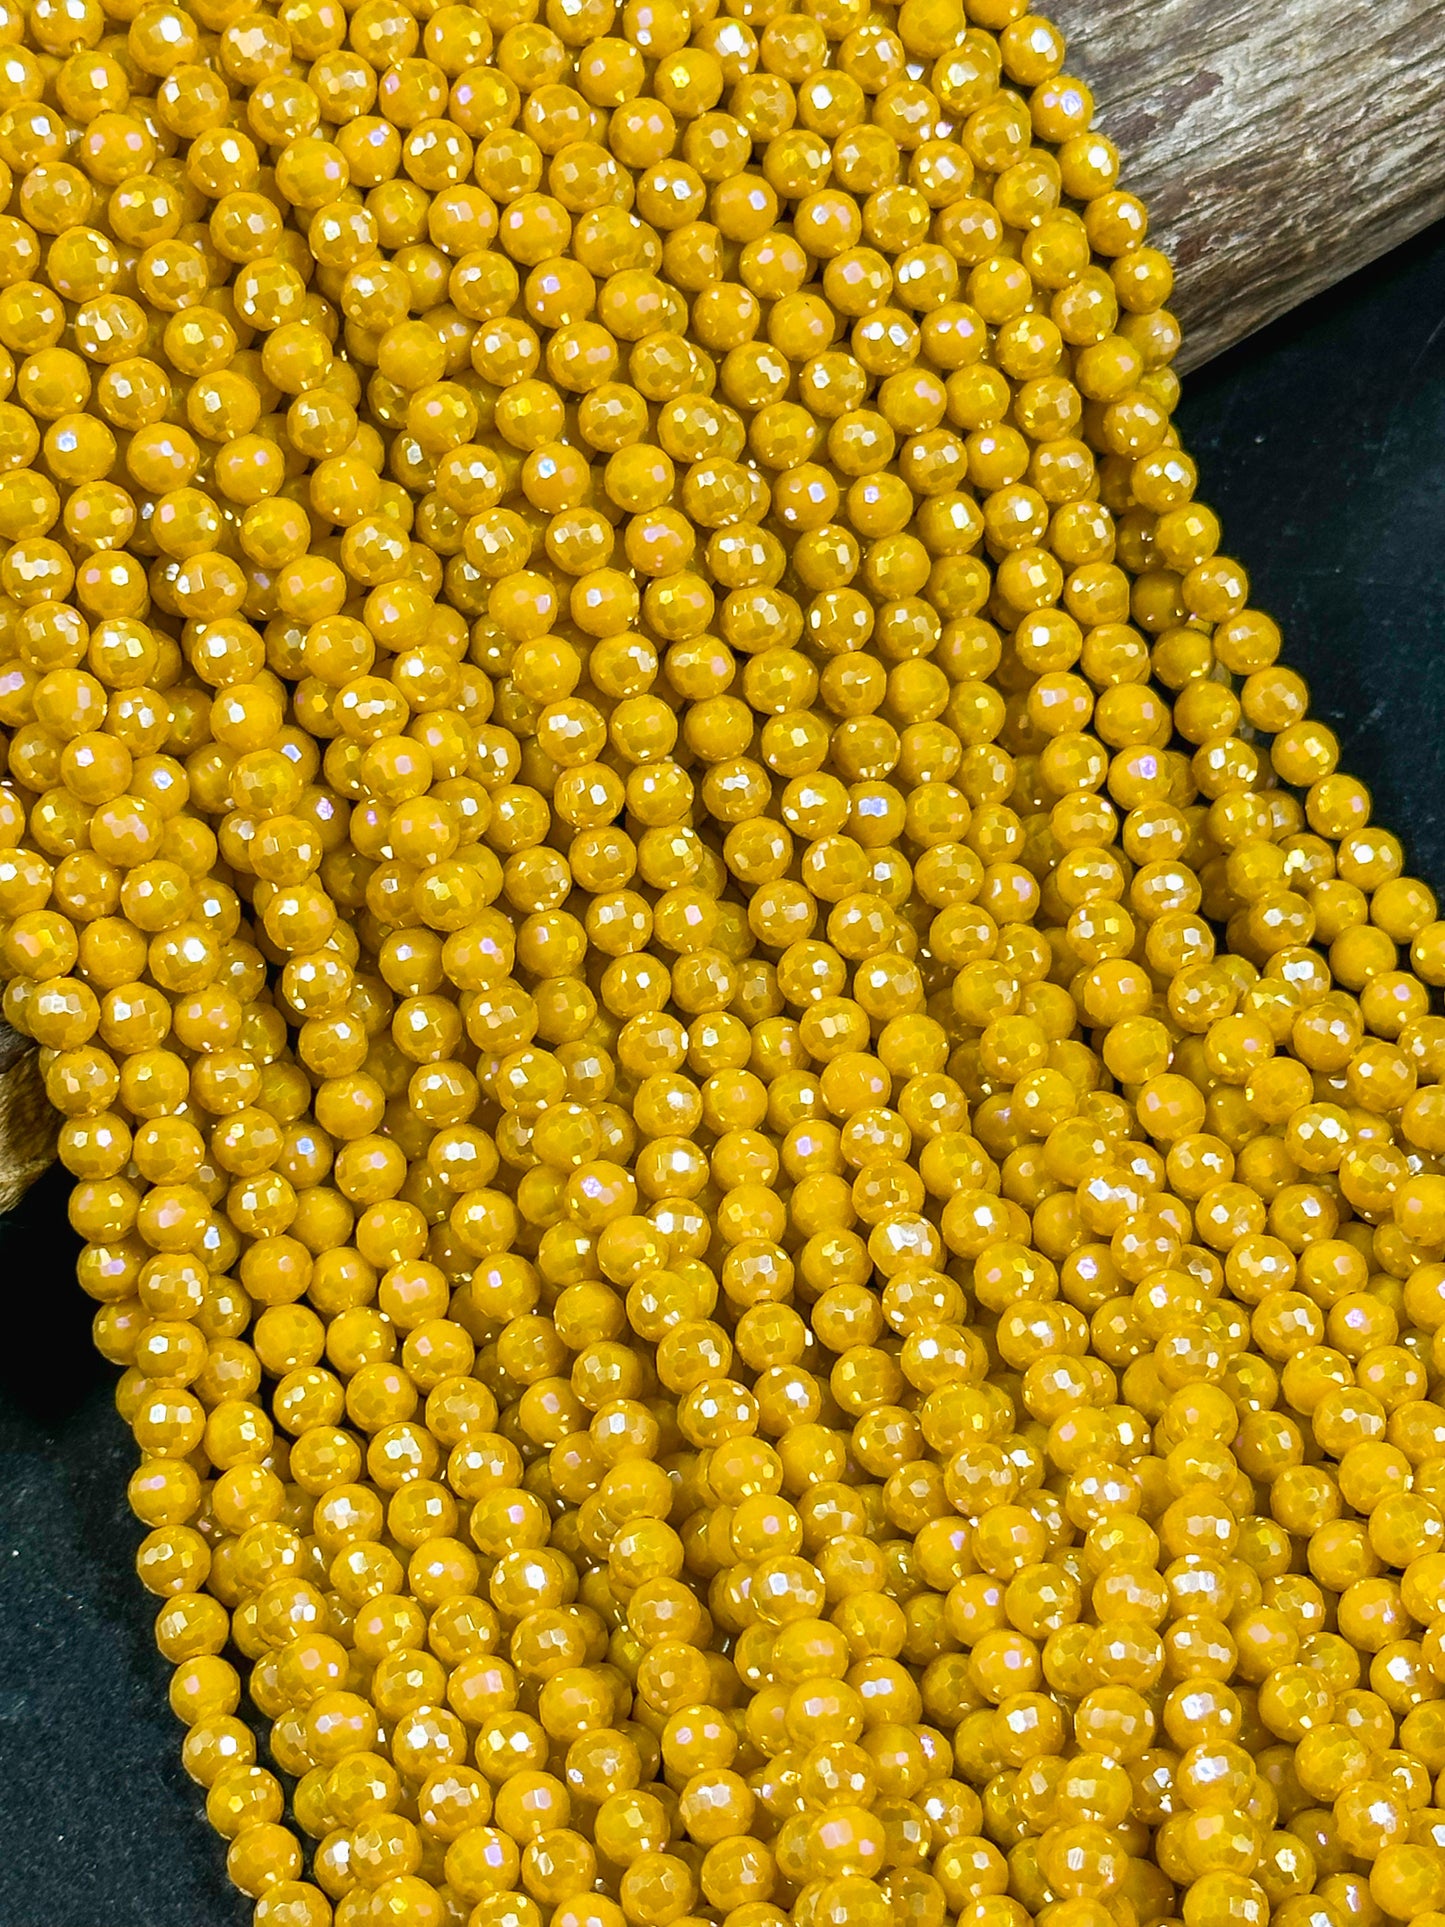 Beautiful Mystic Chinese Crystal Glass Bead Faceted 5.5mm Round Bead, Gorgeous Iridescent Yellow Orange Color Great Quality Crystal Beads